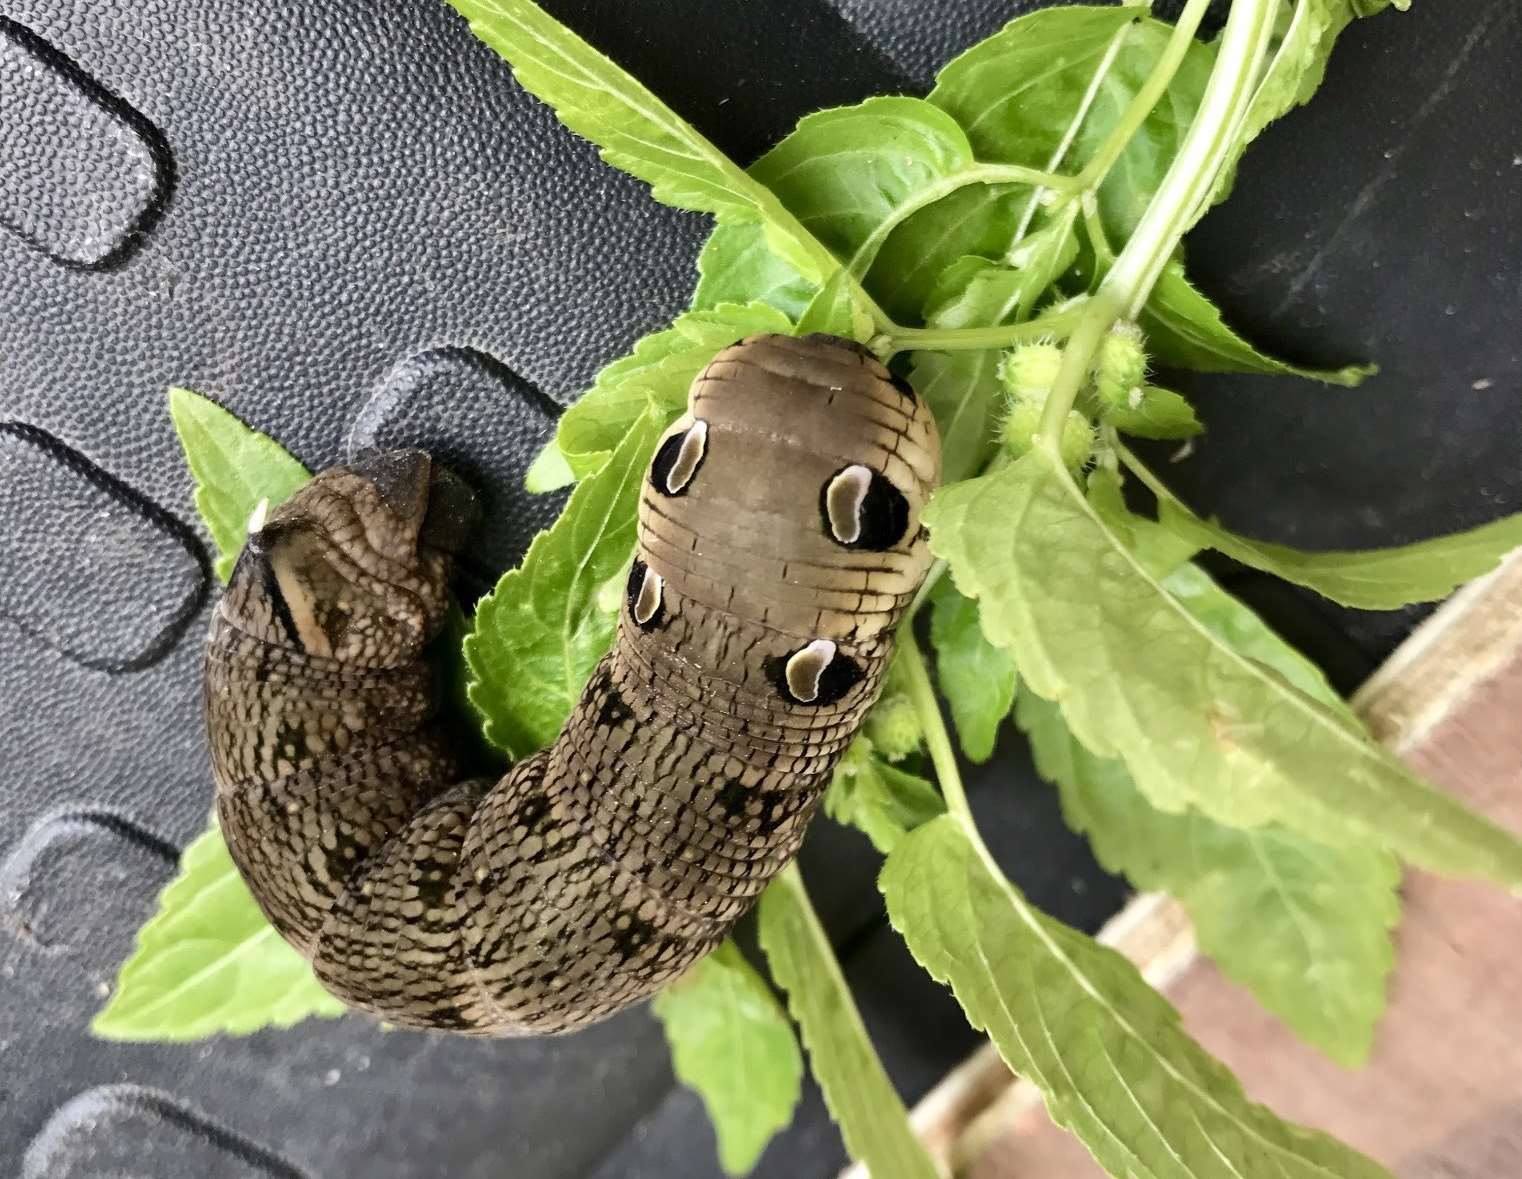 RSPCA officers were called reports of a snake, which turned out to be an Elephant Hawk Moth caterpillar